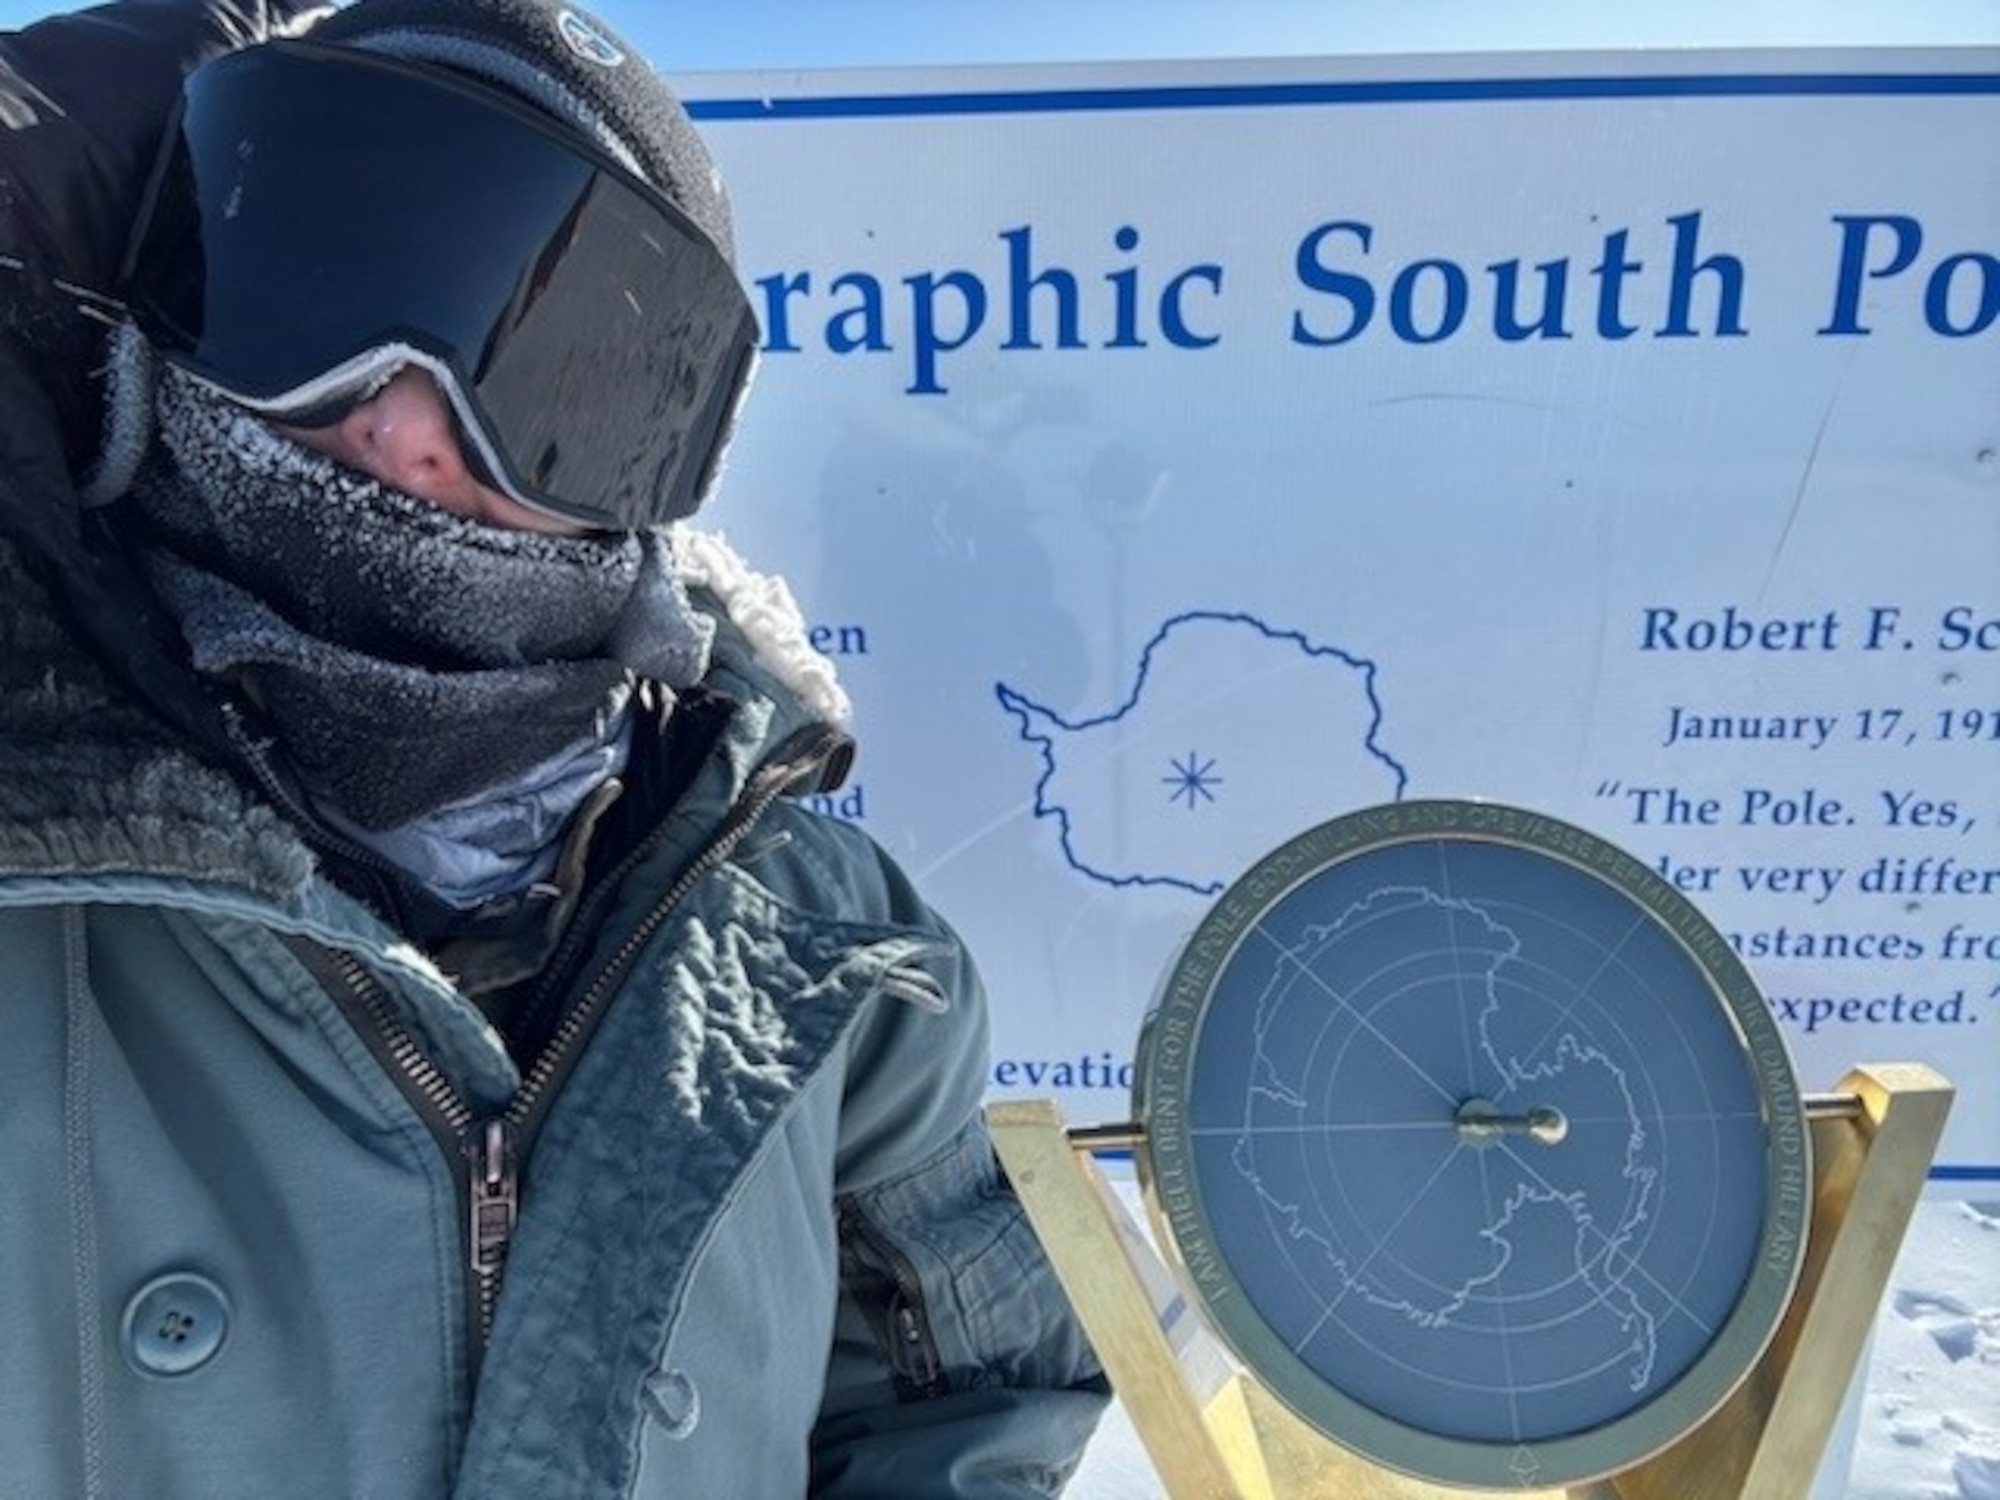 Lt Col Leslie Rassner, physician with the 151st Medical Group, Utah Air National Guard, recently concluded an inspiring mission as the Air Force flight surgeon for Antarctica during Operation Deep Freeze 2023-2024